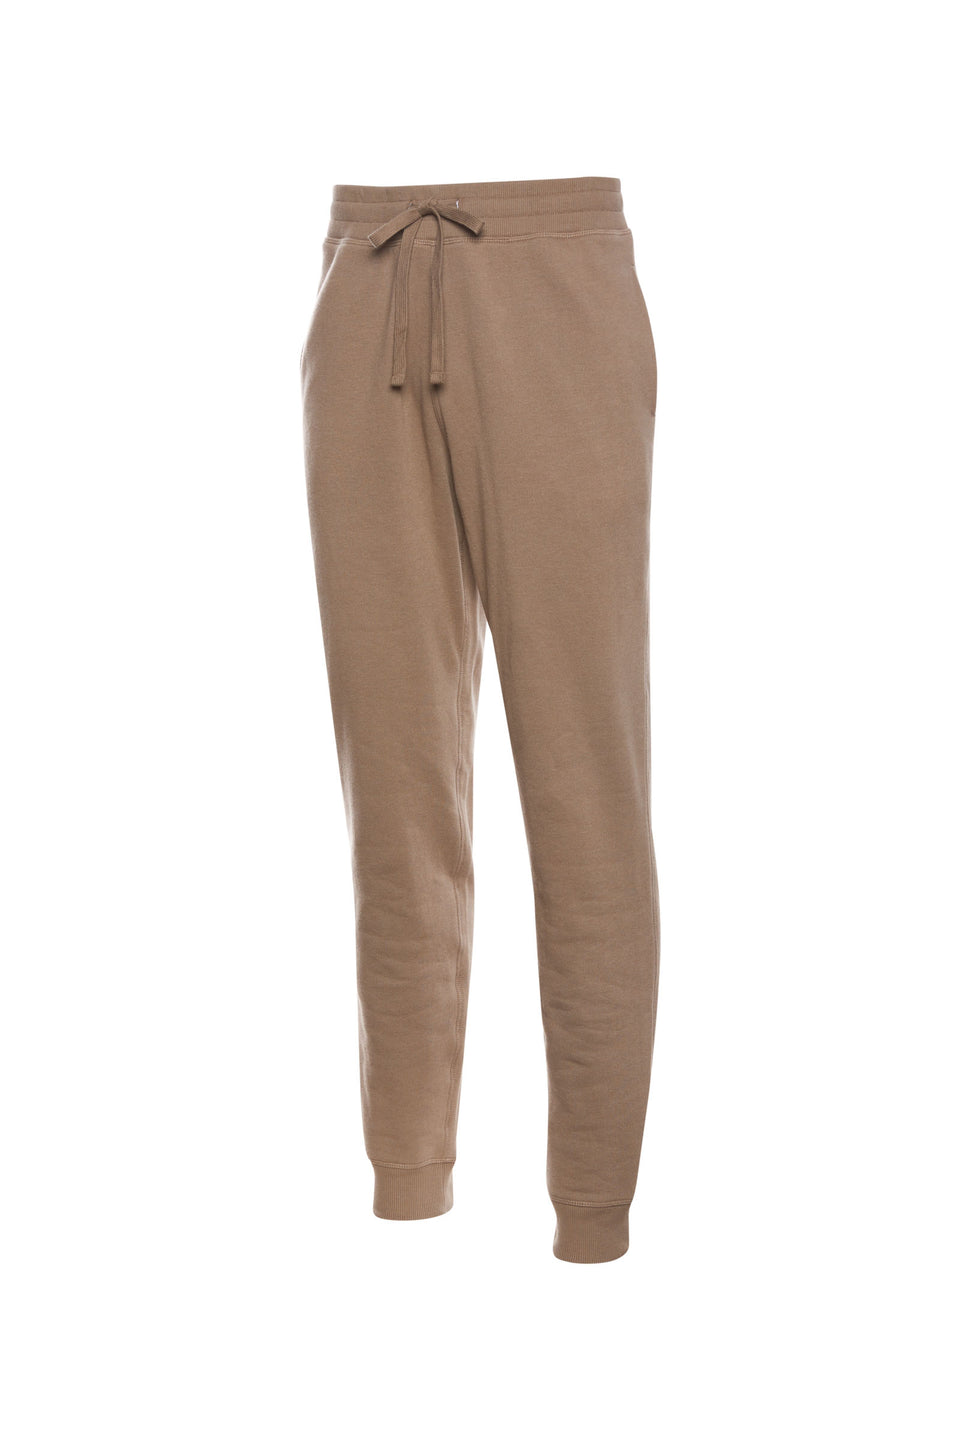 richer_poorer_recycled_sweatpants_warm_grey